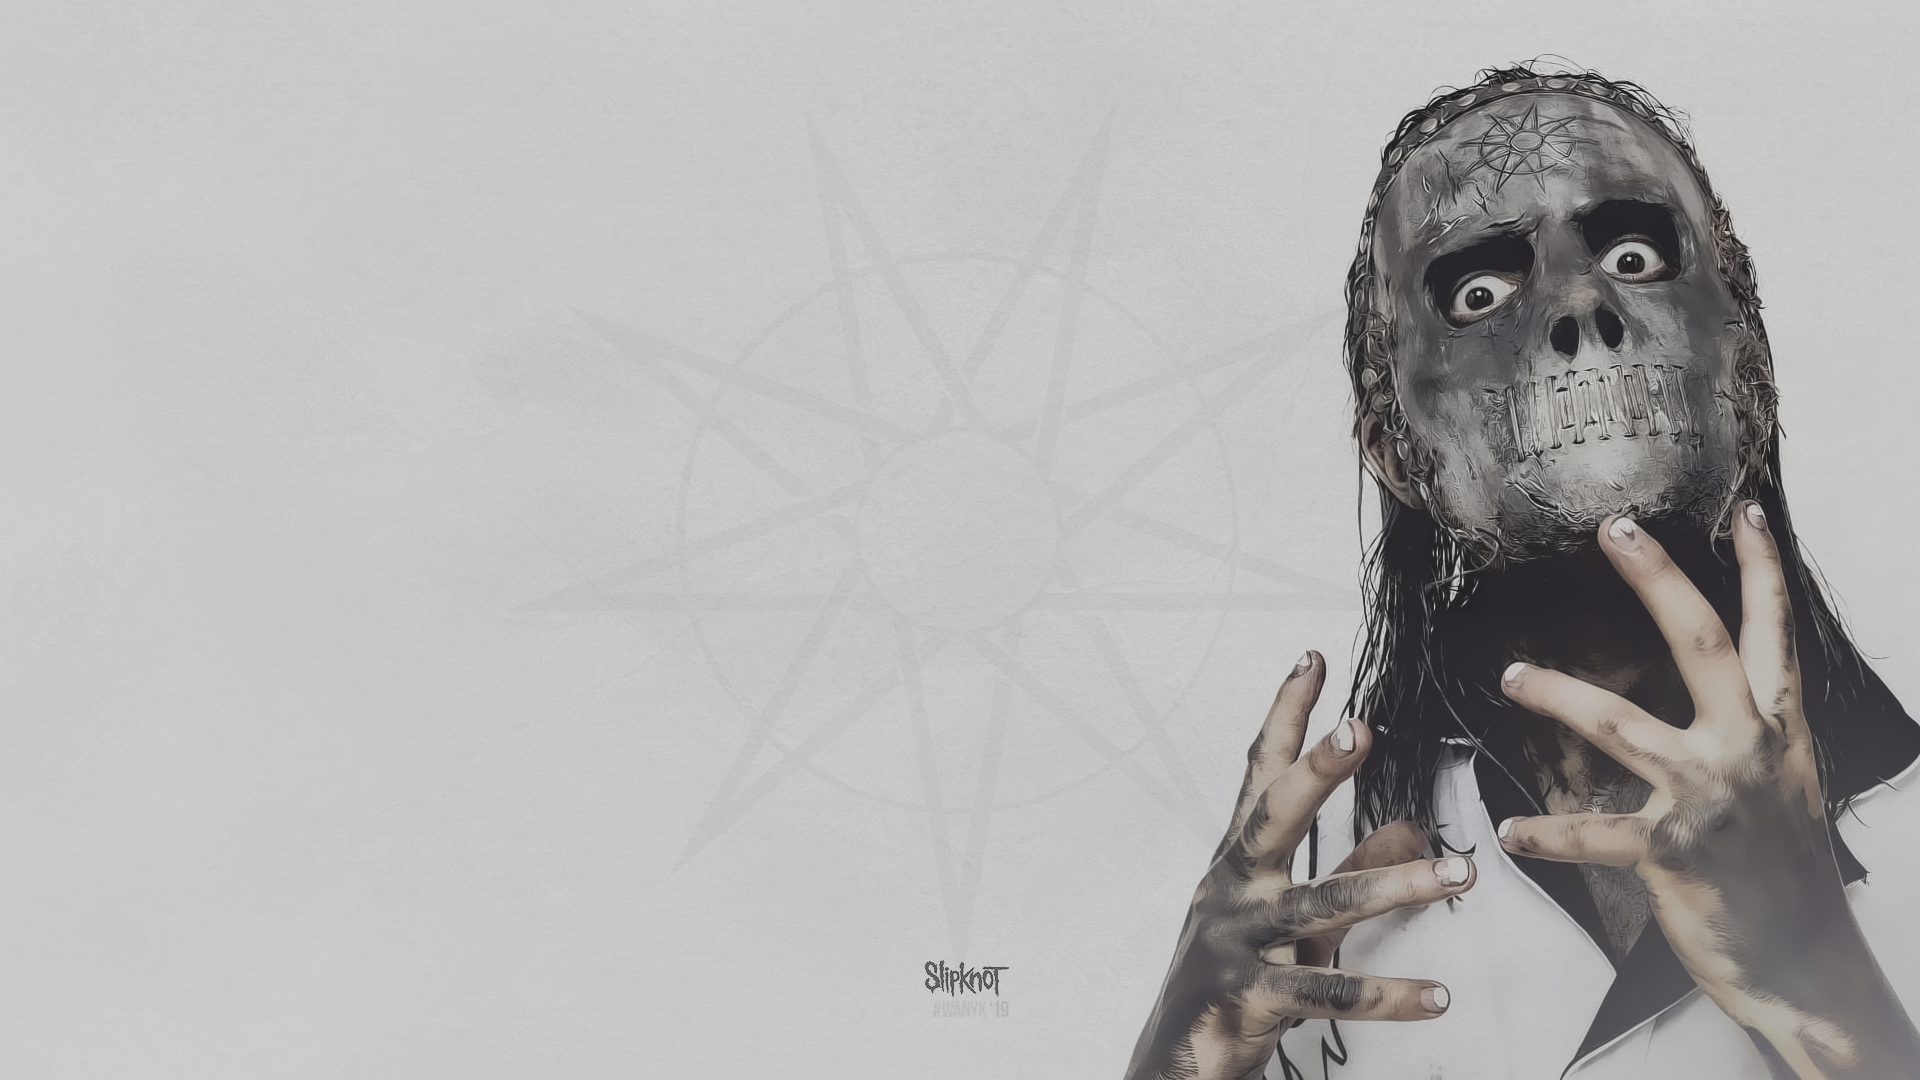 General 1920x1080 Slipknot WANYK We Are Not Your Kind 2019 (year) Jay Weinberg music band